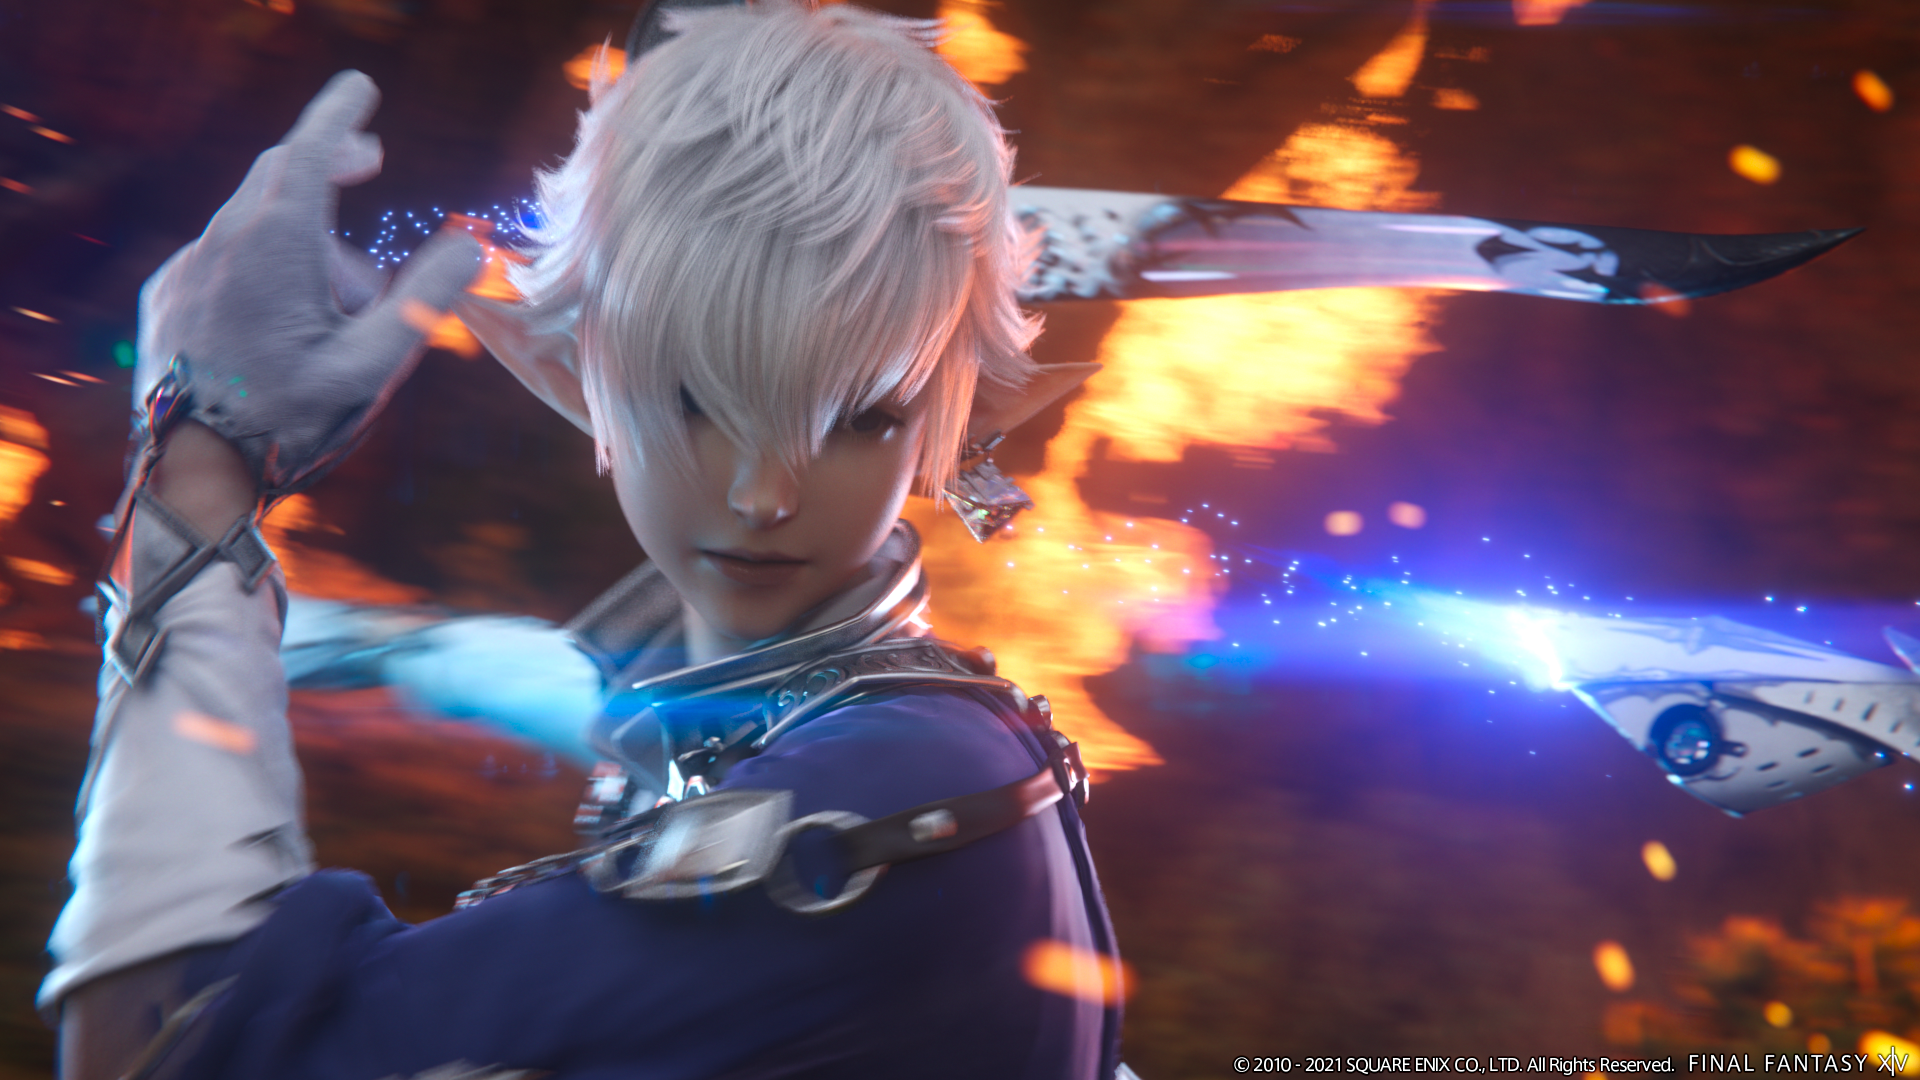 Image for FF14 Endwalker players are running into long queue times and game errors